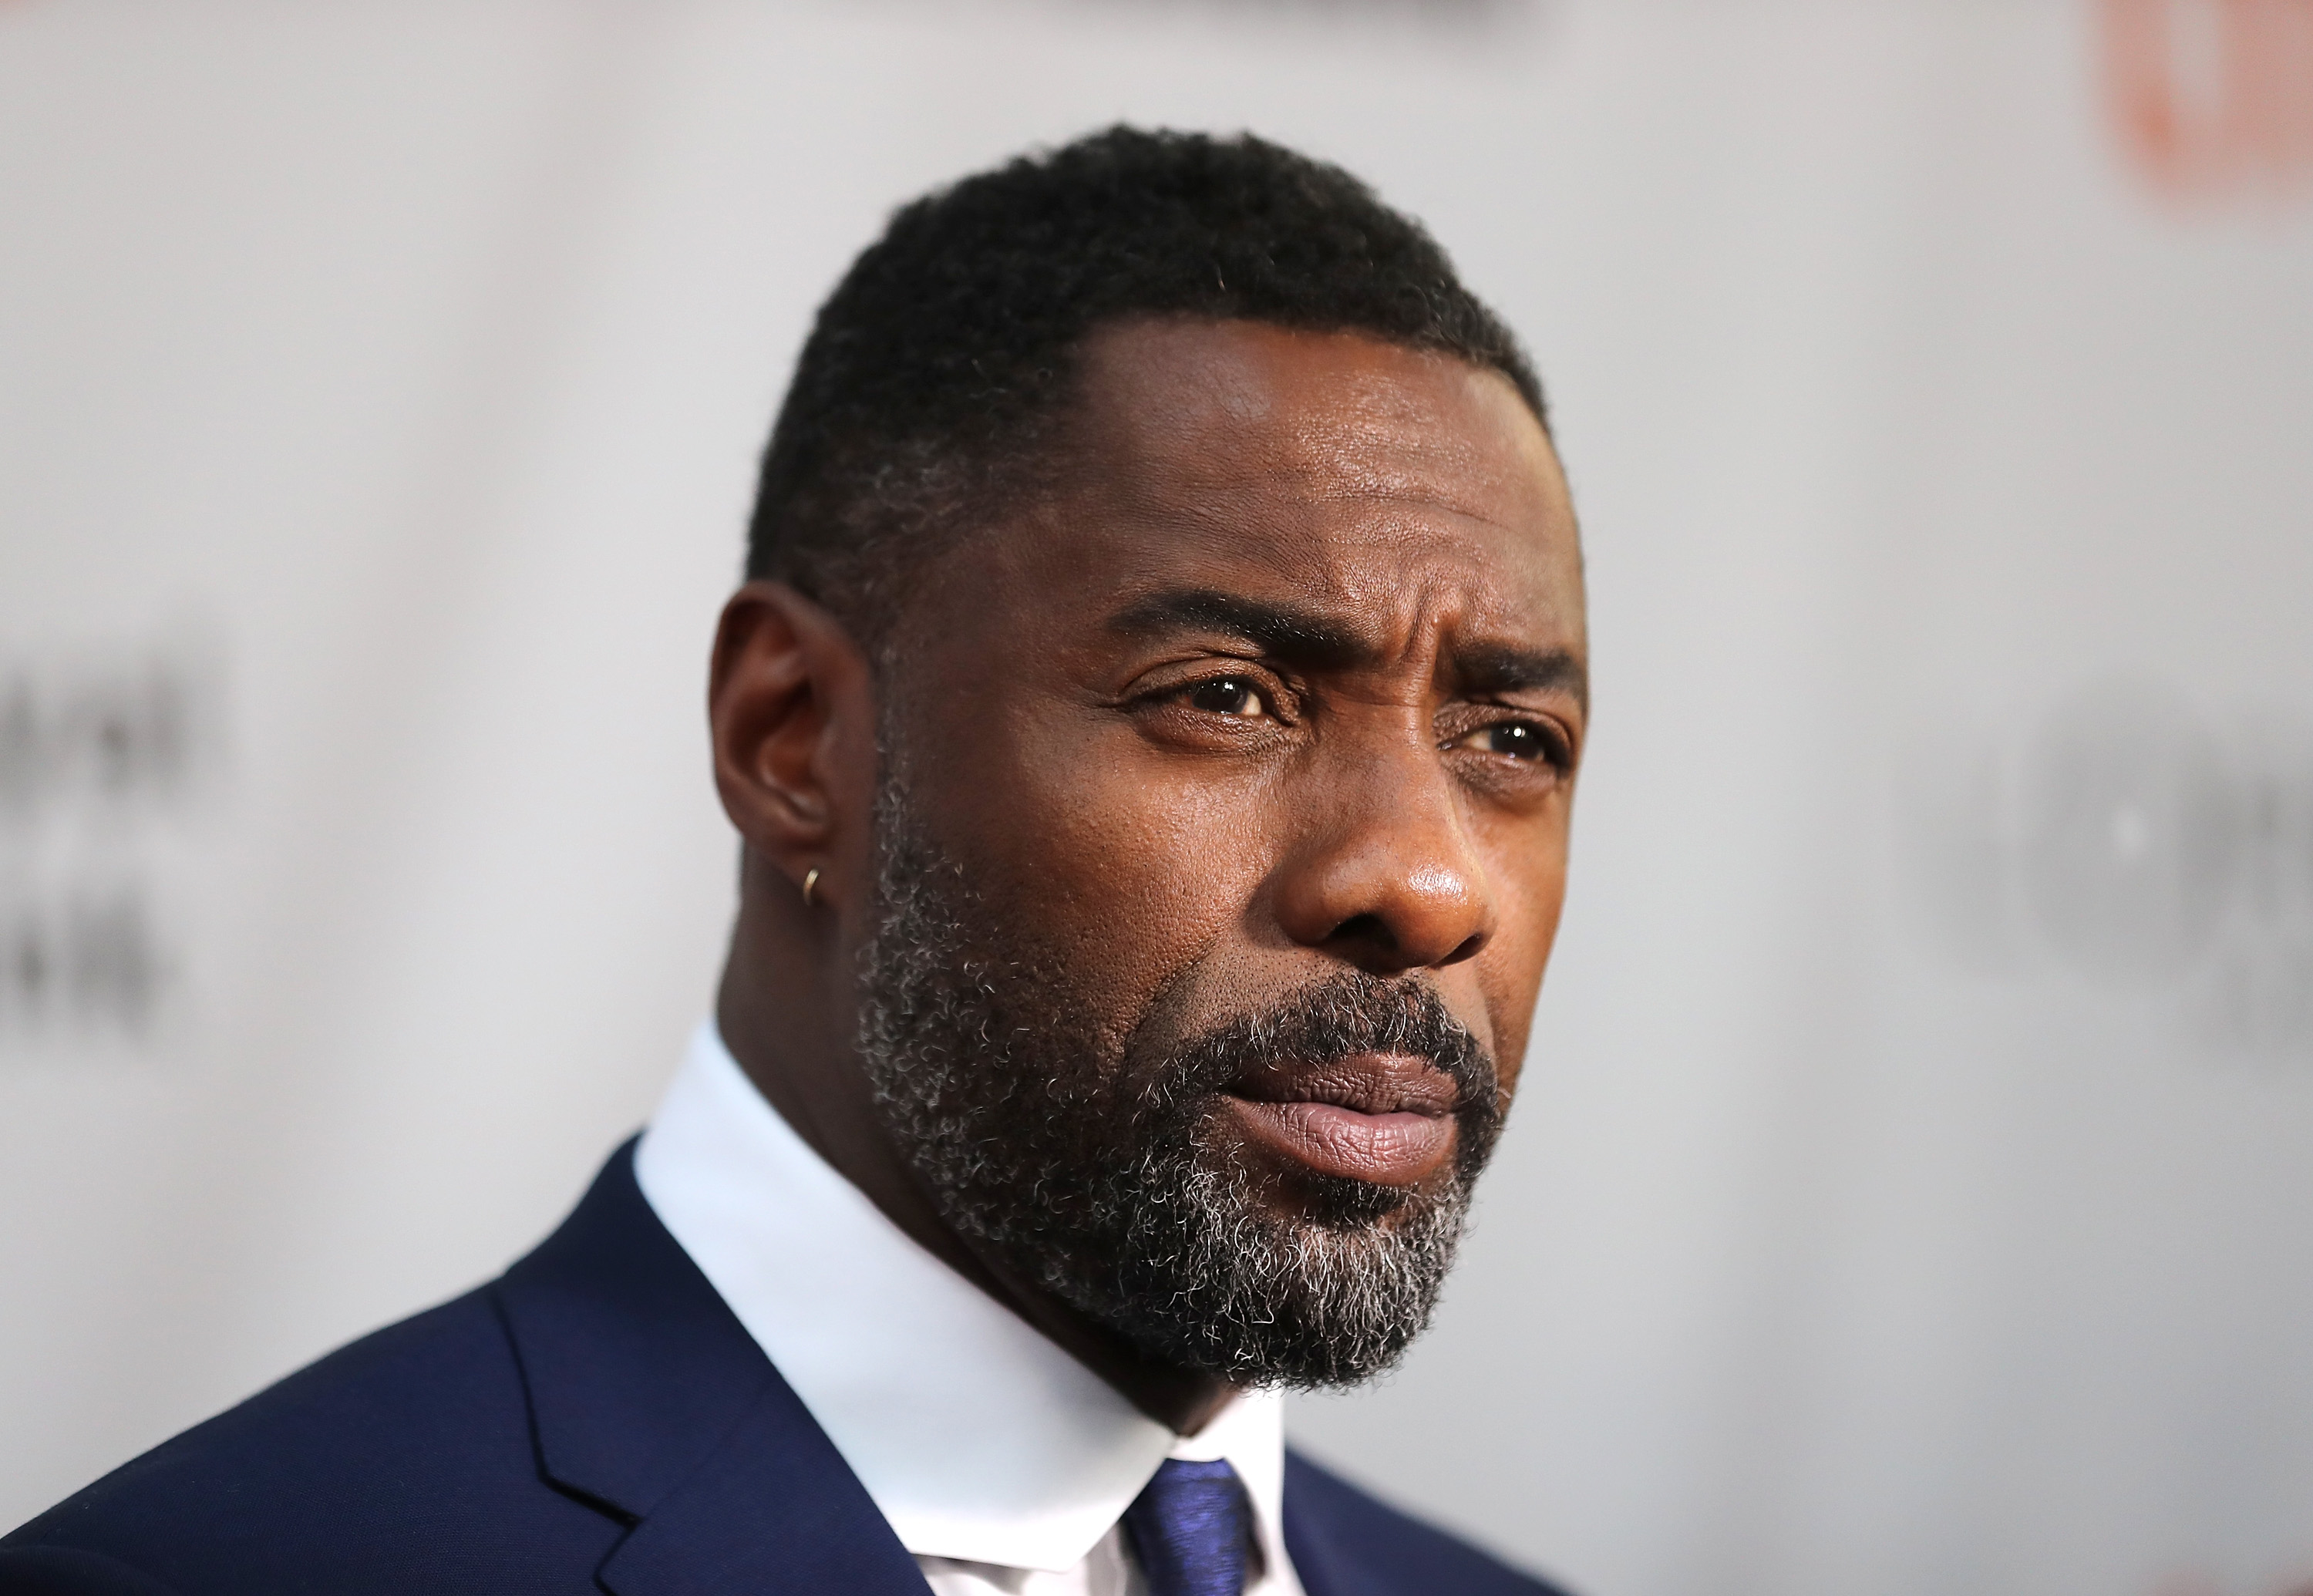 Actor Idris Elba speaks to the media at the premiere of "The Mountain Between Us" during the 2017 Toronto International Film Festival at Roy Thomson Hall on September 10, 2017 in Toronto, Canada. (J. Countess&mdash;WireImage)